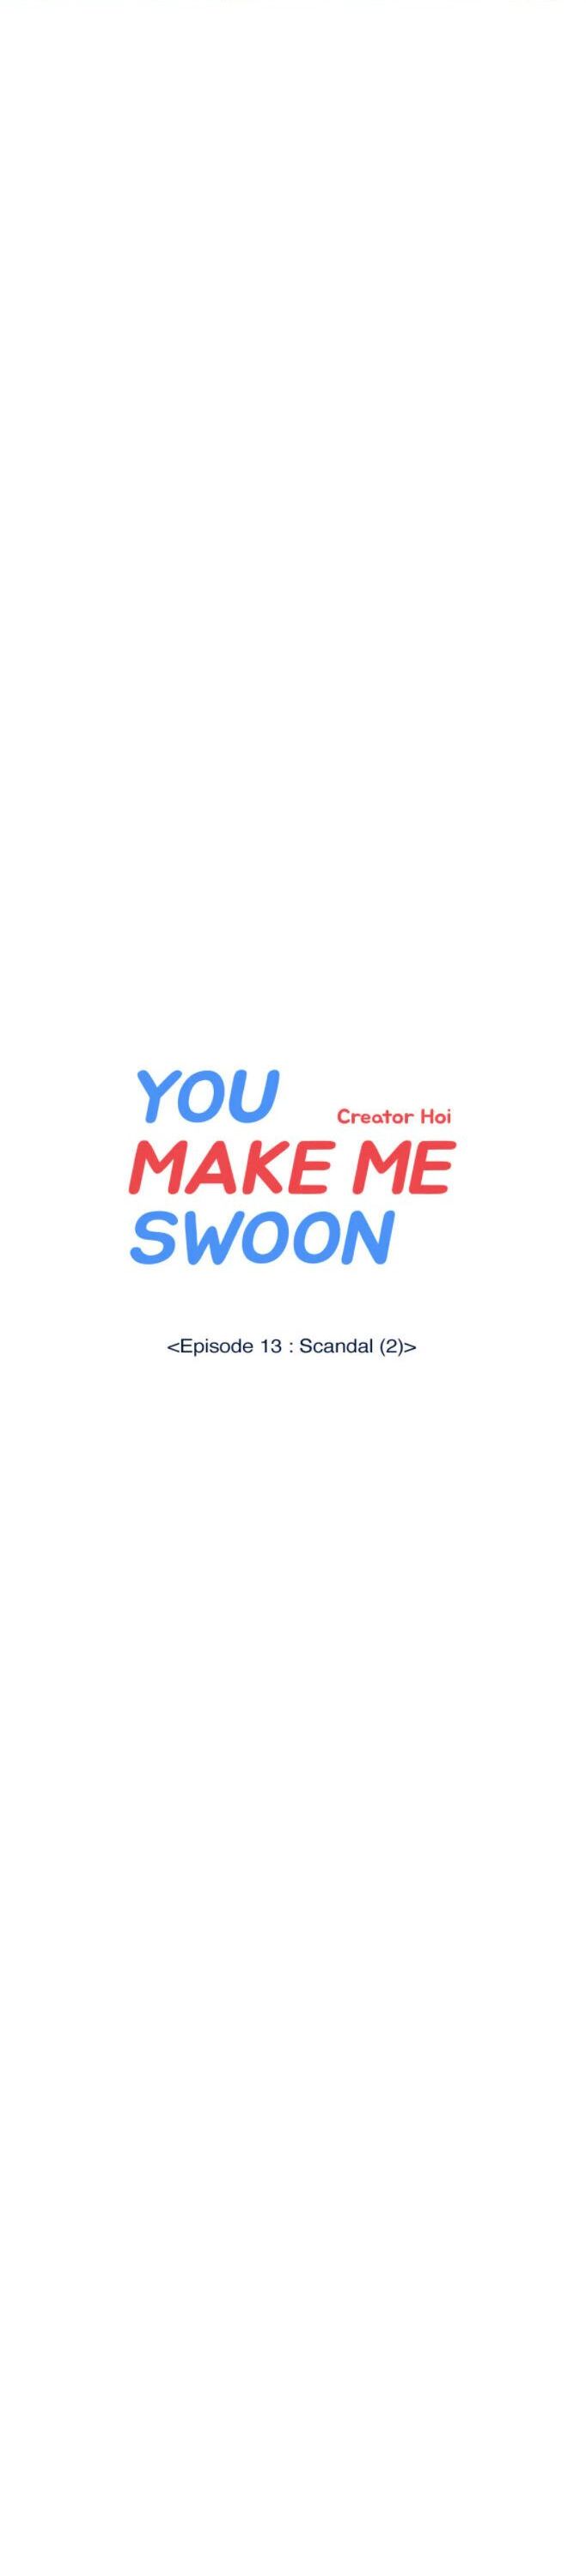 You Make Me Swoon - Page 1